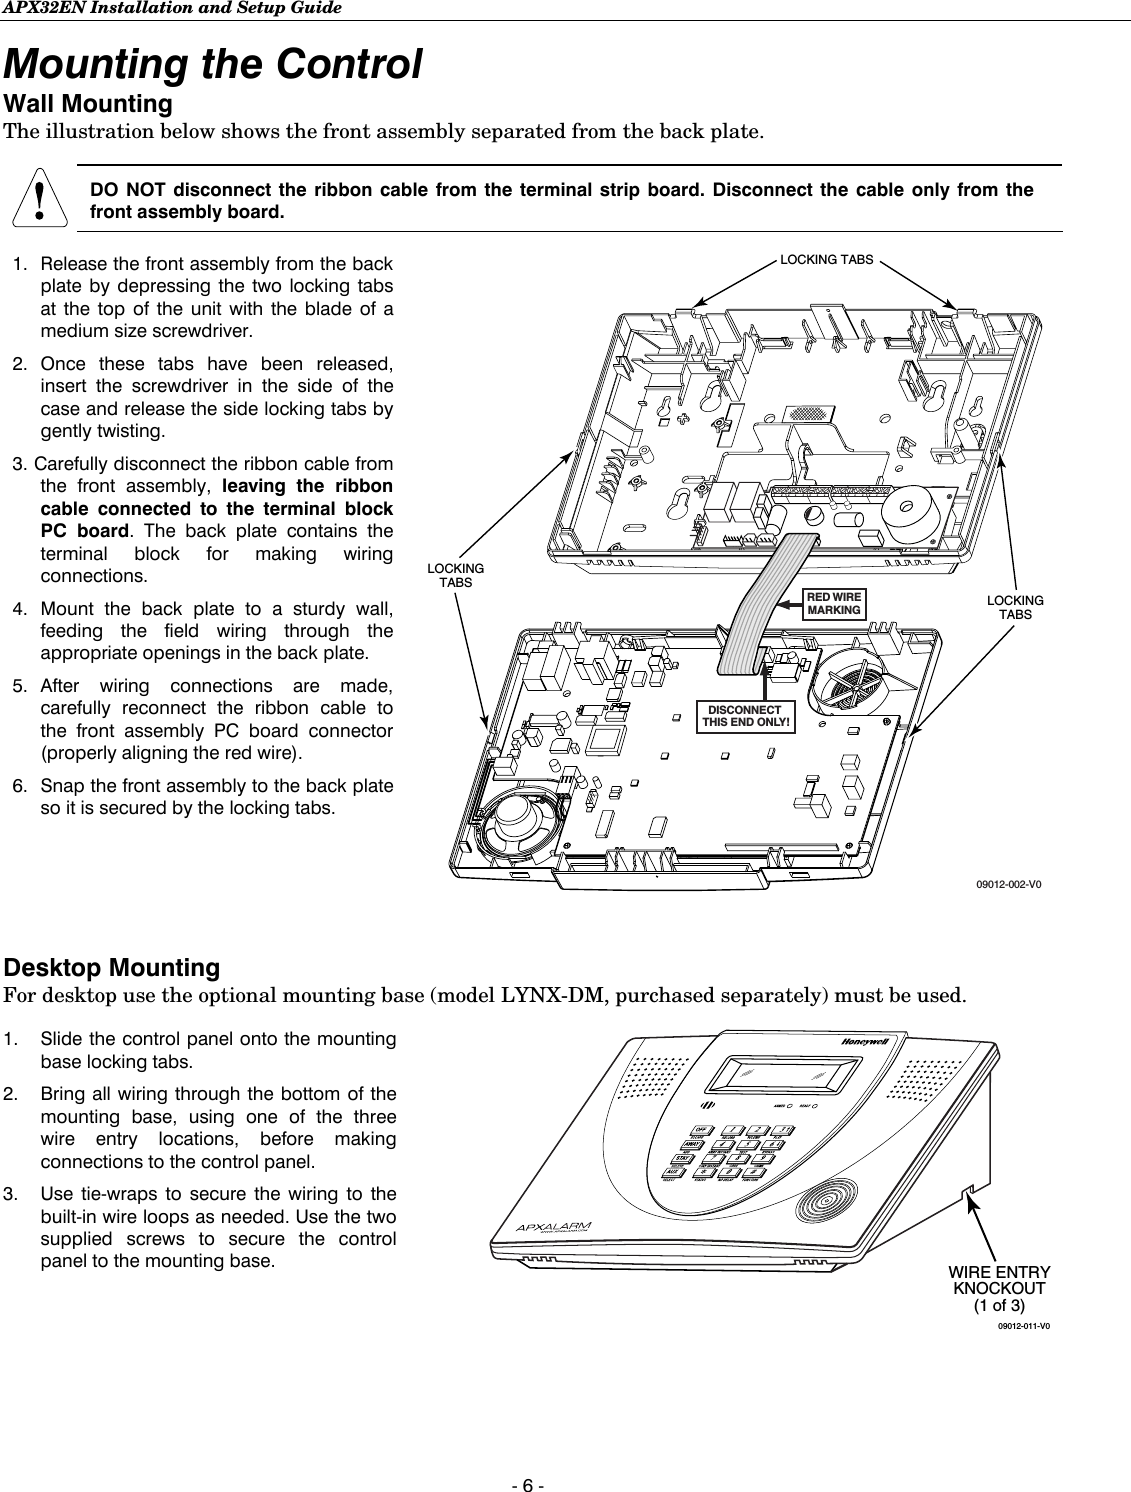 APX32EN Installation and Setup Guide  - 6 - Mounting the Control Wall Mounting The illustration below shows the front assembly separated from the back plate.   DO NOT disconnect the ribbon cable from the terminal strip board. Disconnect the cable only from the front assembly board.   1.  Release the front assembly from the back plate by depressing the two locking tabs at the top of the unit with the blade of a medium size screwdriver.  2. Once these tabs have been released, insert the screwdriver in the side of the case and release the side locking tabs by gently twisting.   3. Carefully disconnect the ribbon cable from the front assembly, leaving the ribbon cable connected to the terminal block PC board. The back plate contains the terminal block for making wiring connections.  4. Mount the back plate to a sturdy wall, feeding the field wiring through the appropriate openings in the back plate.  5. After wiring connections are made, carefully reconnect the ribbon cable to the front assembly PC board connector (properly aligning the red wire).  6.  Snap the front assembly to the back plate so it is secured by the locking tabs.  LOCKING TABSRED WIREMARKINGDISCONNECT THIS END ONLY!09012-002-V0LOCKINGTABSLOCKINGTABS    Desktop Mounting For desktop use the optional mounting base (model LYNX-DM, purchased separately) must be used.  1.  Slide the control panel onto the mounting base locking tabs.  2.  Bring all wiring through the bottom of the mounting base, using one of the three wire entry locations, before making connections to the control panel.  3.  Use tie-wraps to secure the wiring to the built-in wire loops as needed. Use the two supplied screws to secure the control panel to the mounting base.    09012-011-V0WIRE ENTRYKNOCKOUT(1 of 3)    